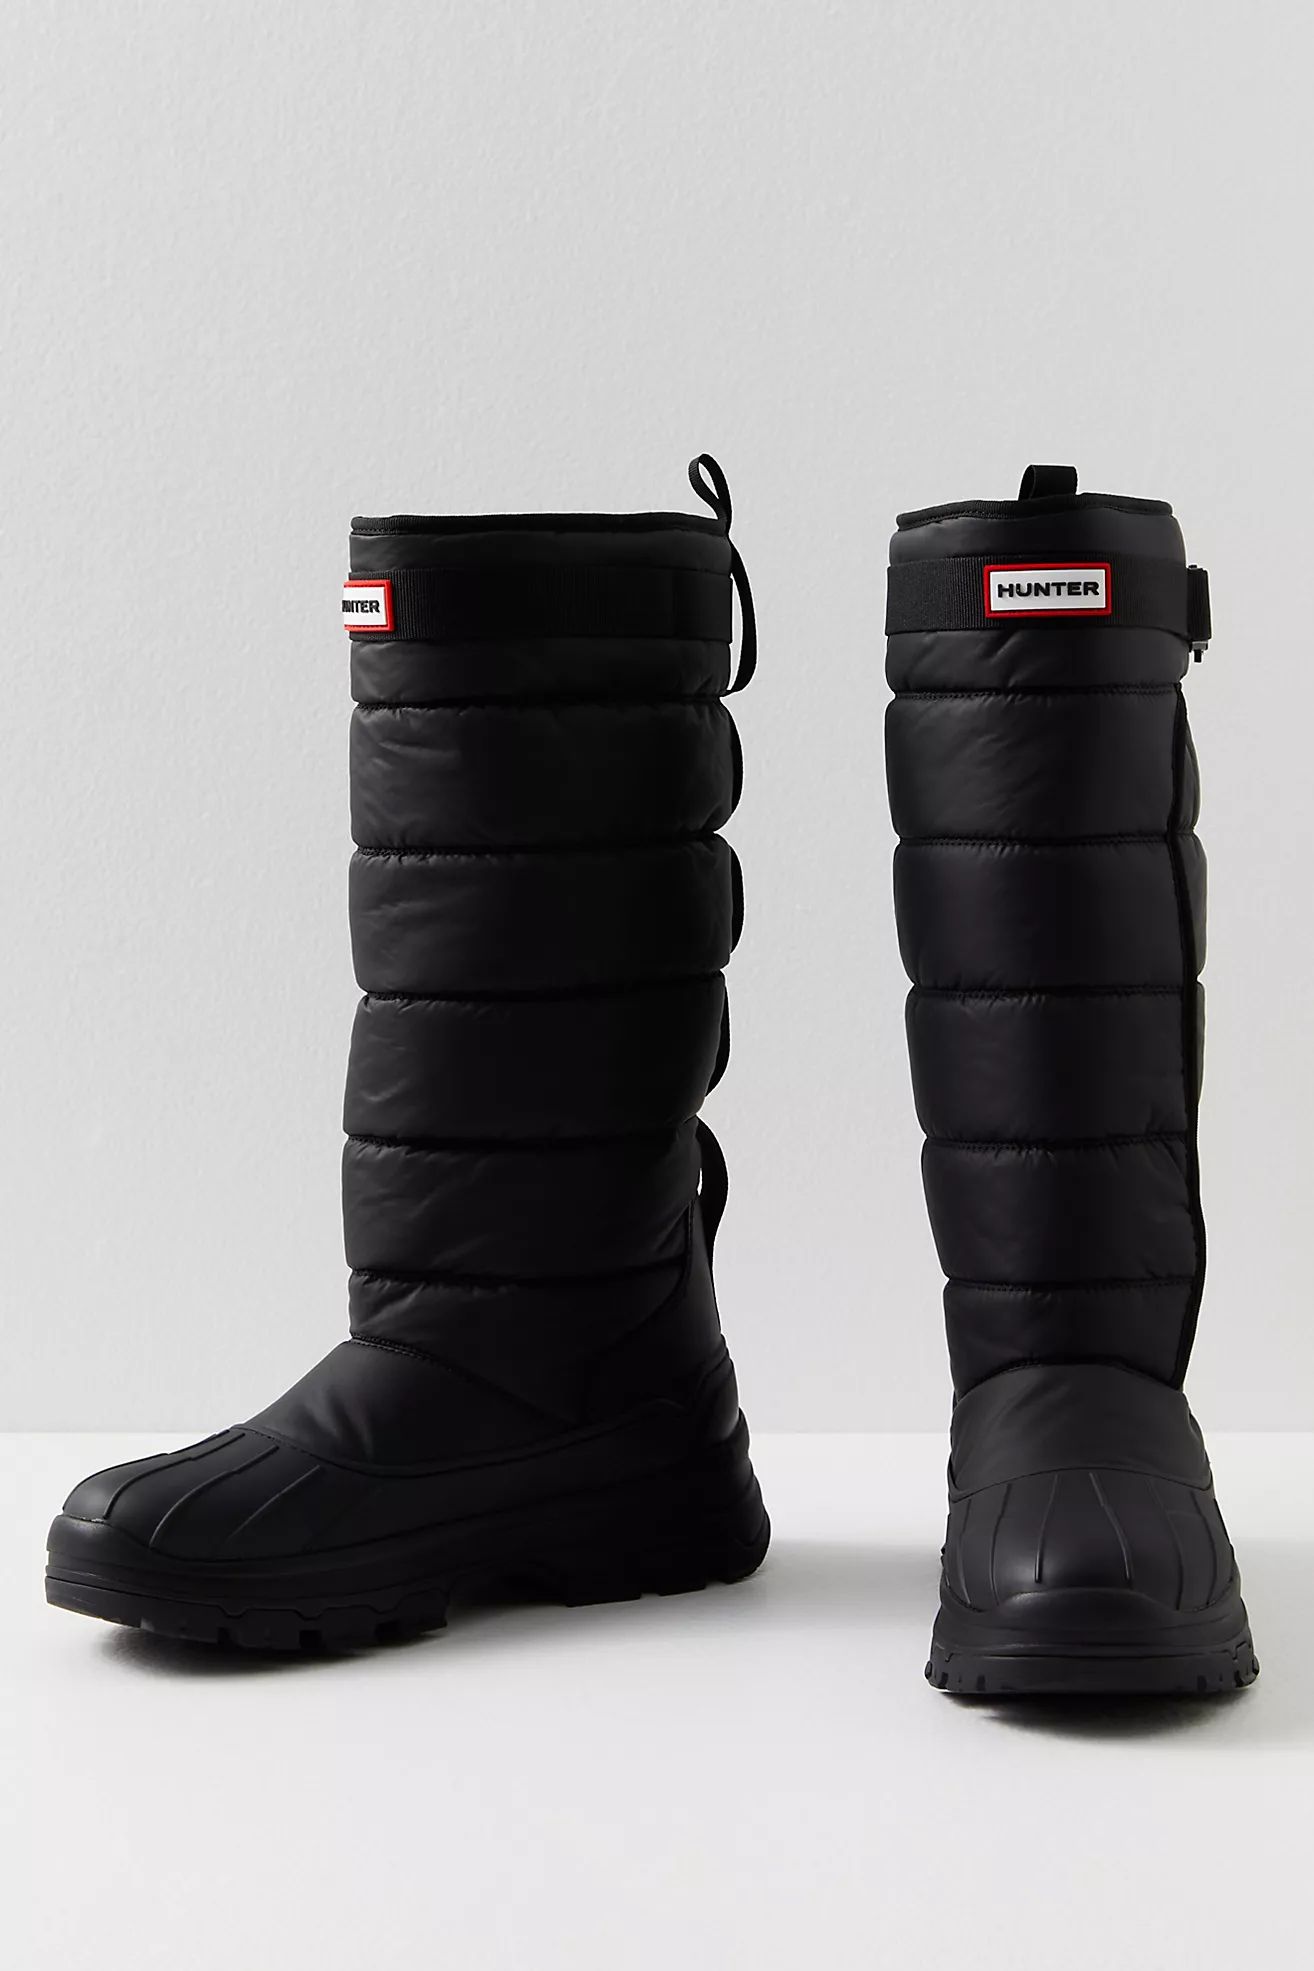 Hunter Intrepid Tall Buckle Boots | Free People (Global - UK&FR Excluded)